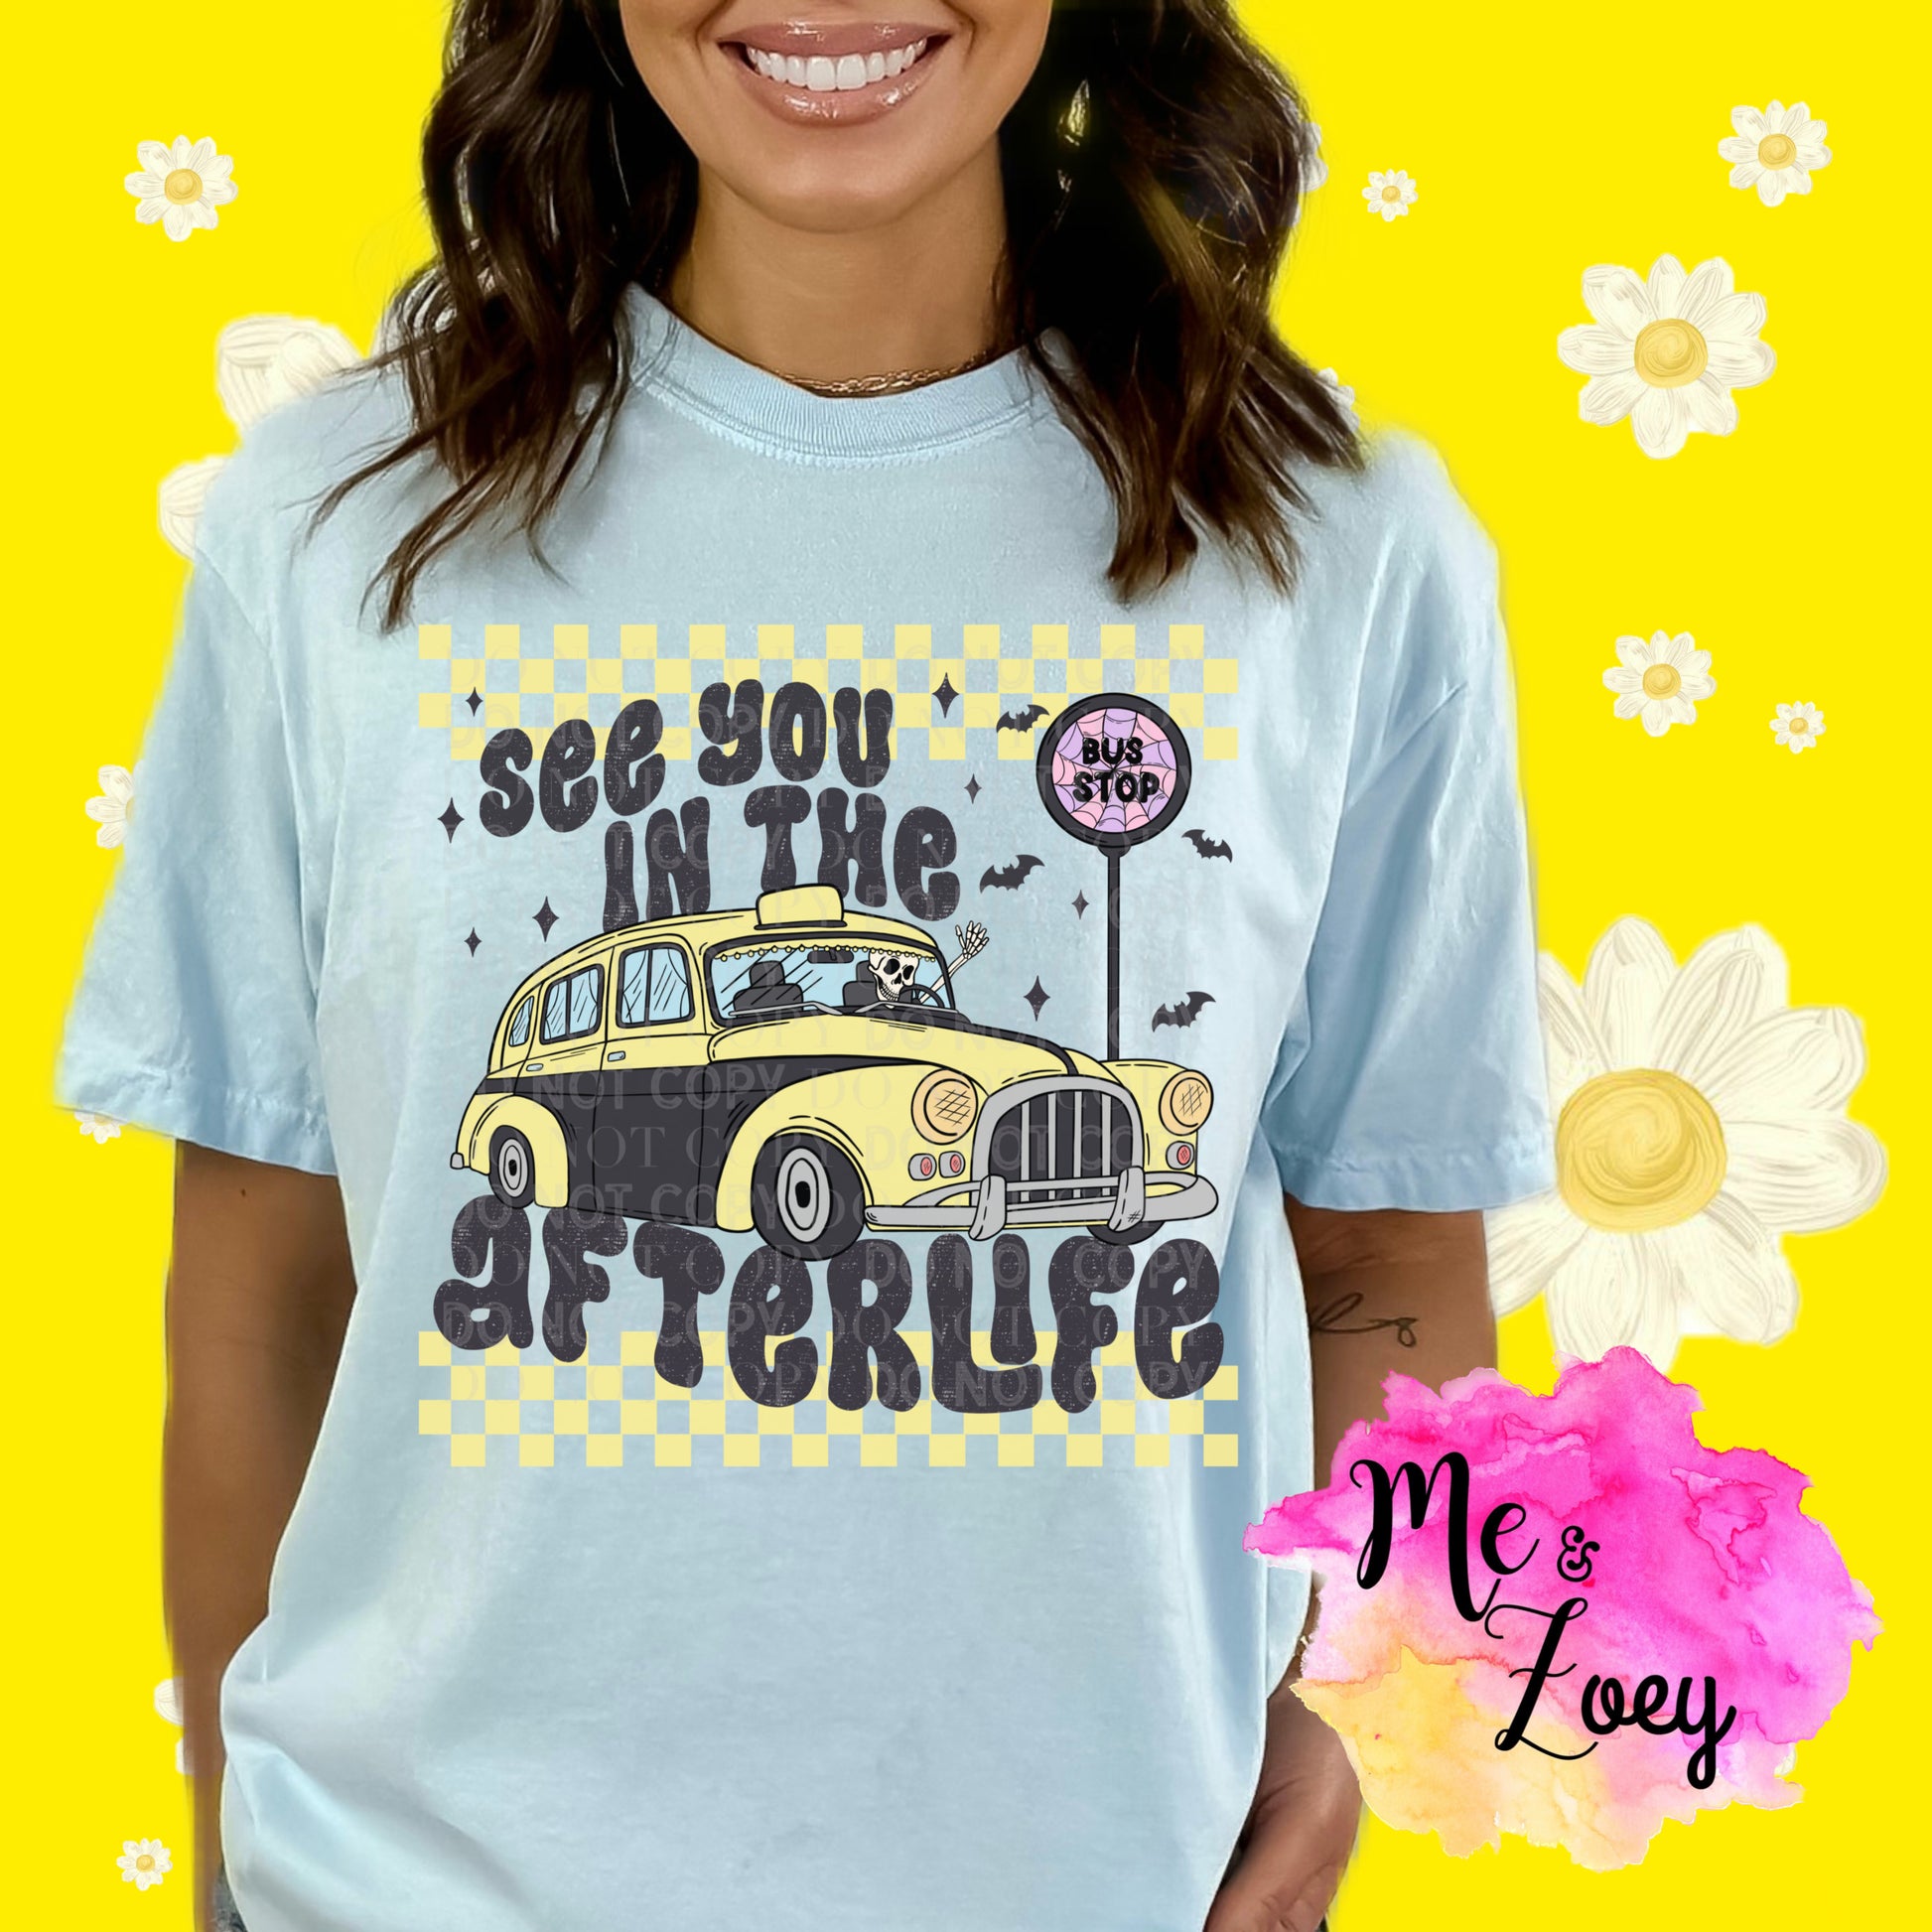 See You In The Afterlife Graphic Tee - MeAndZoey